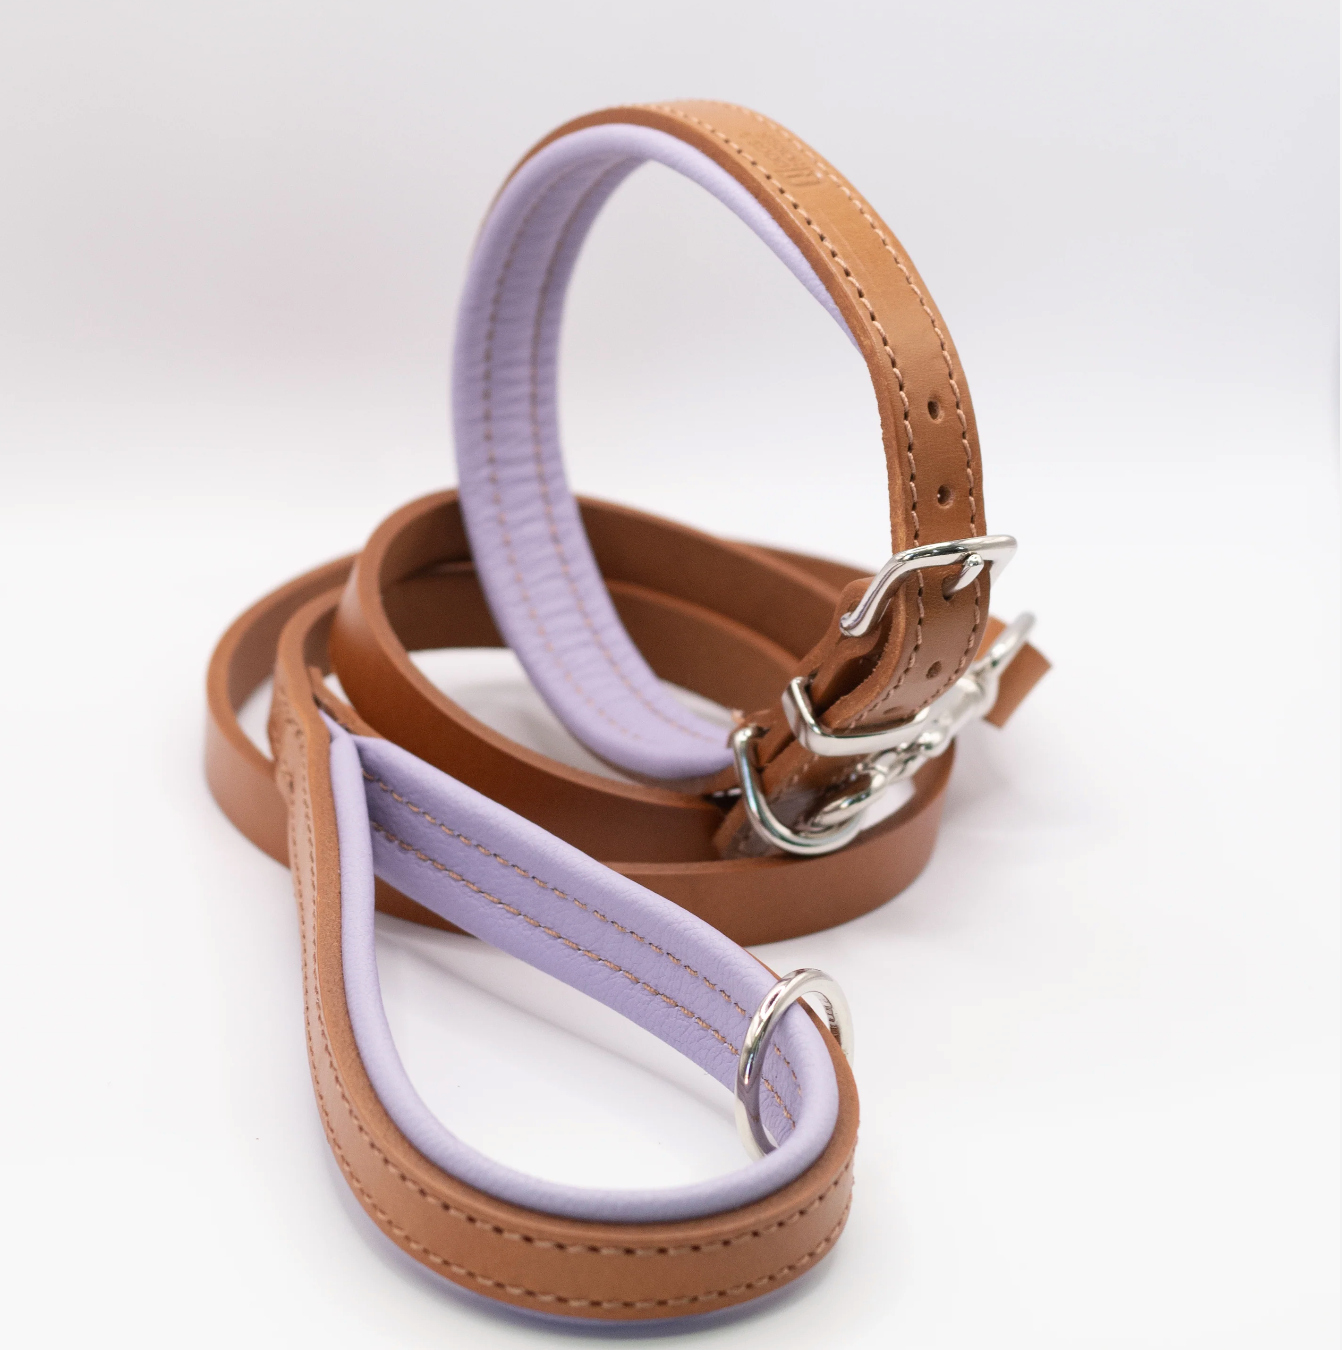 Padded Leather Dog Collar and Lead Set Tan and Lilac